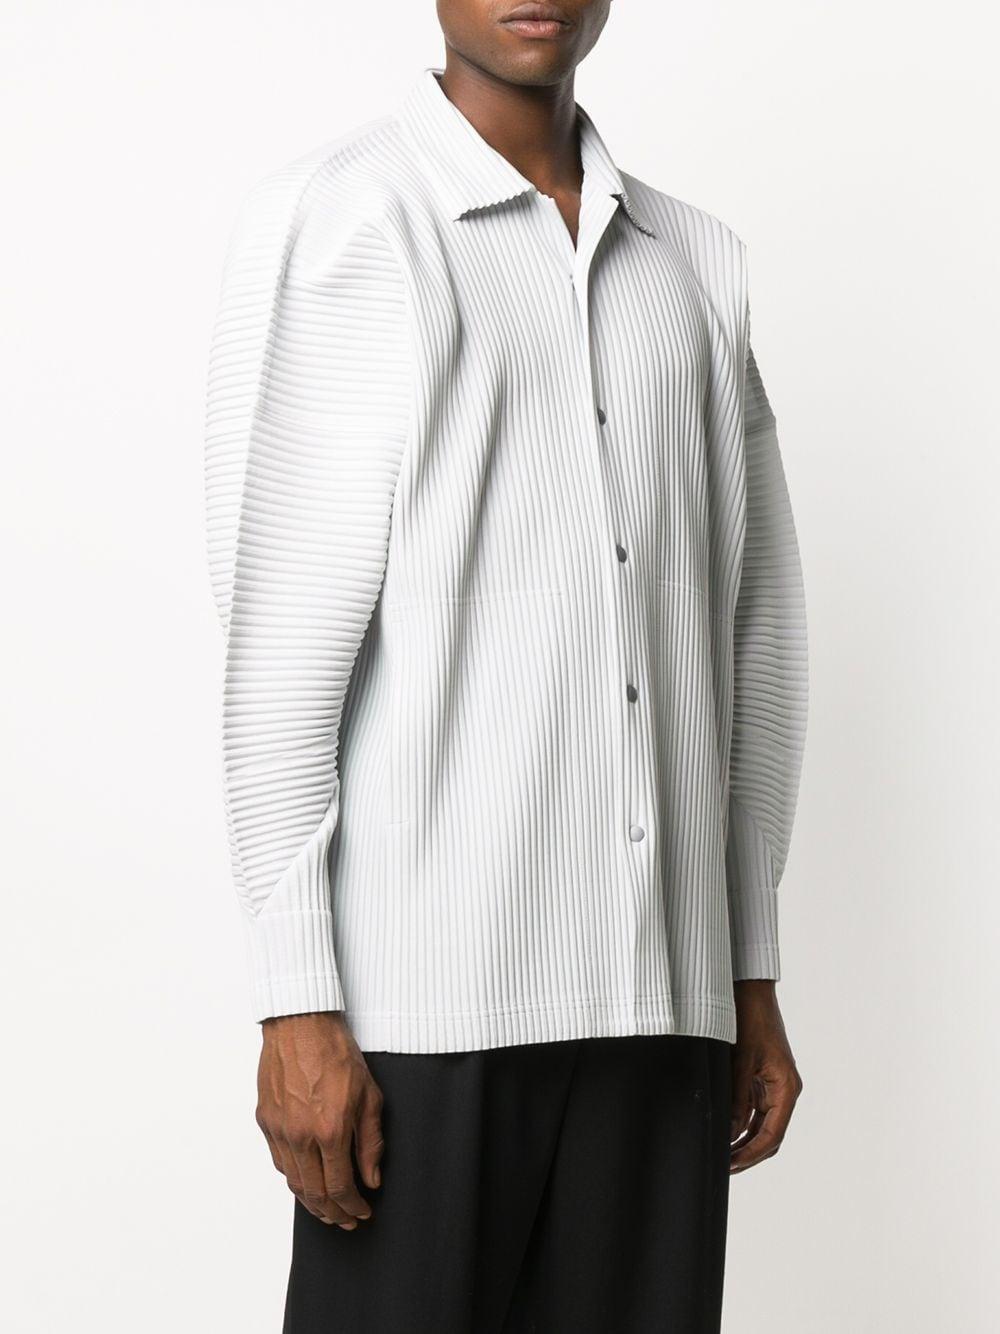 Homme Plissé Issey Miyake Pleated Button-down Shirt in White for Men - Lyst